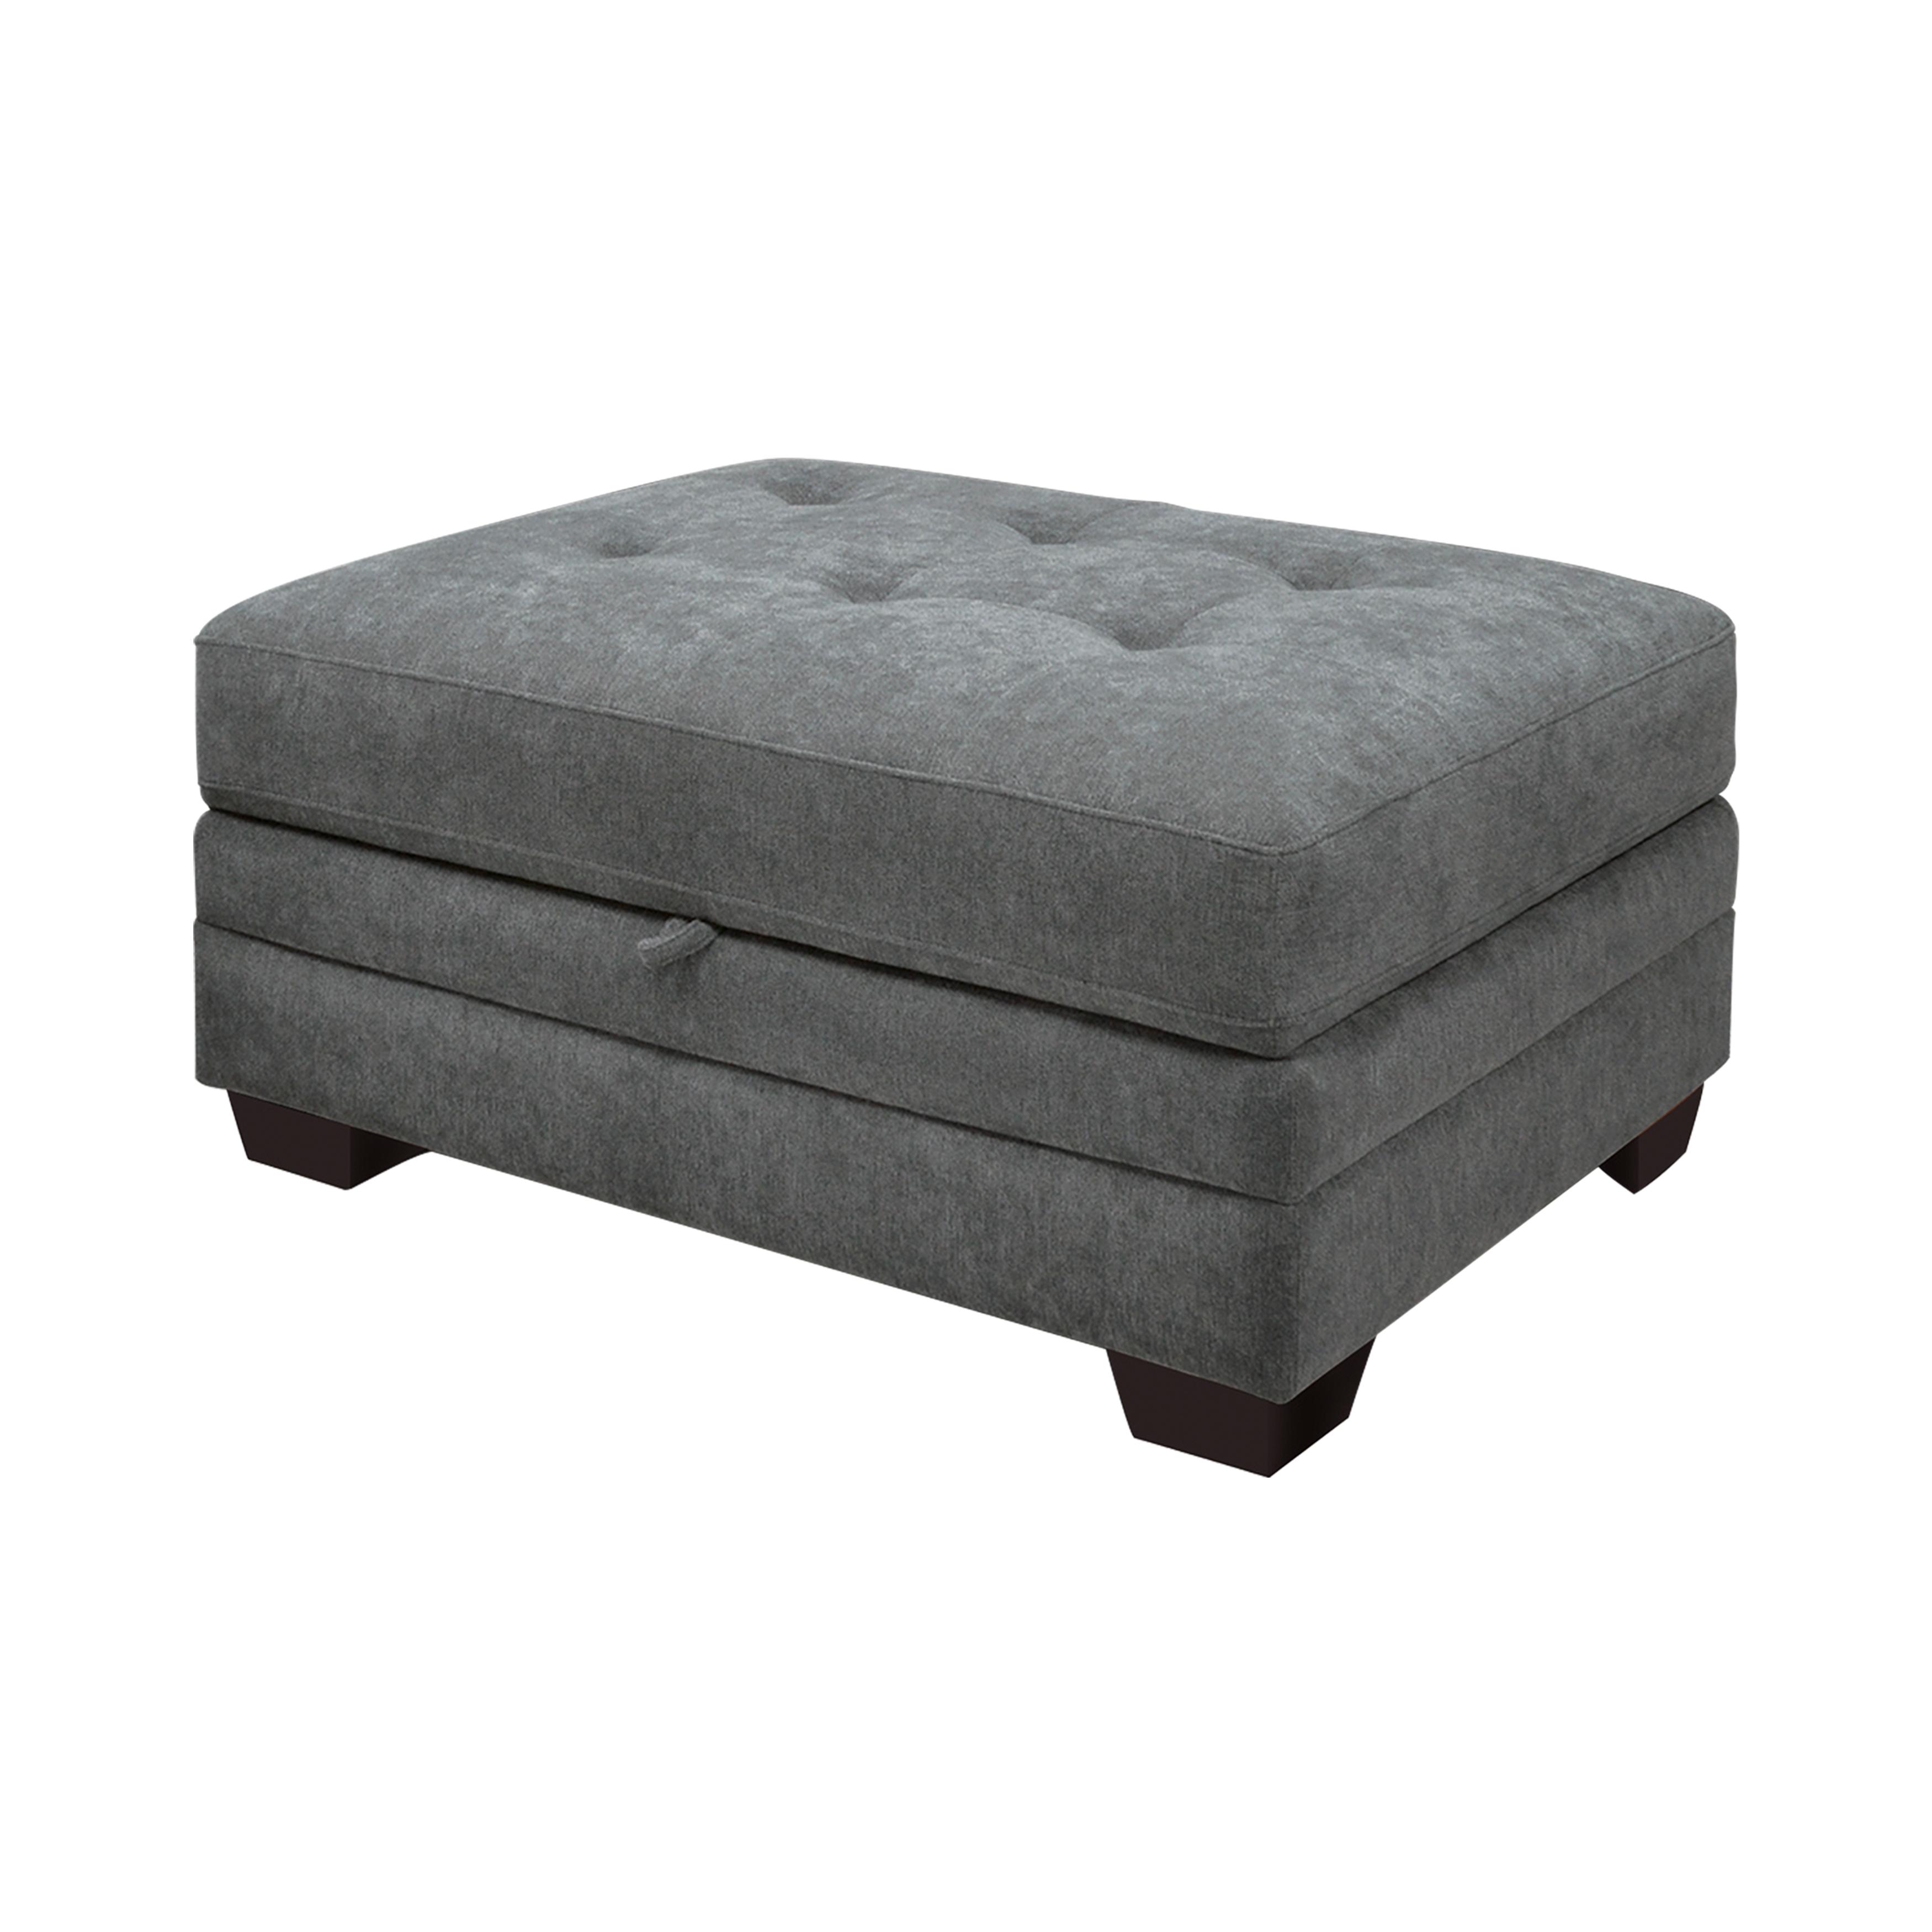 Transitional Ottoman 9212GRY-4 Sidney 9212GRY-4 in Gray 